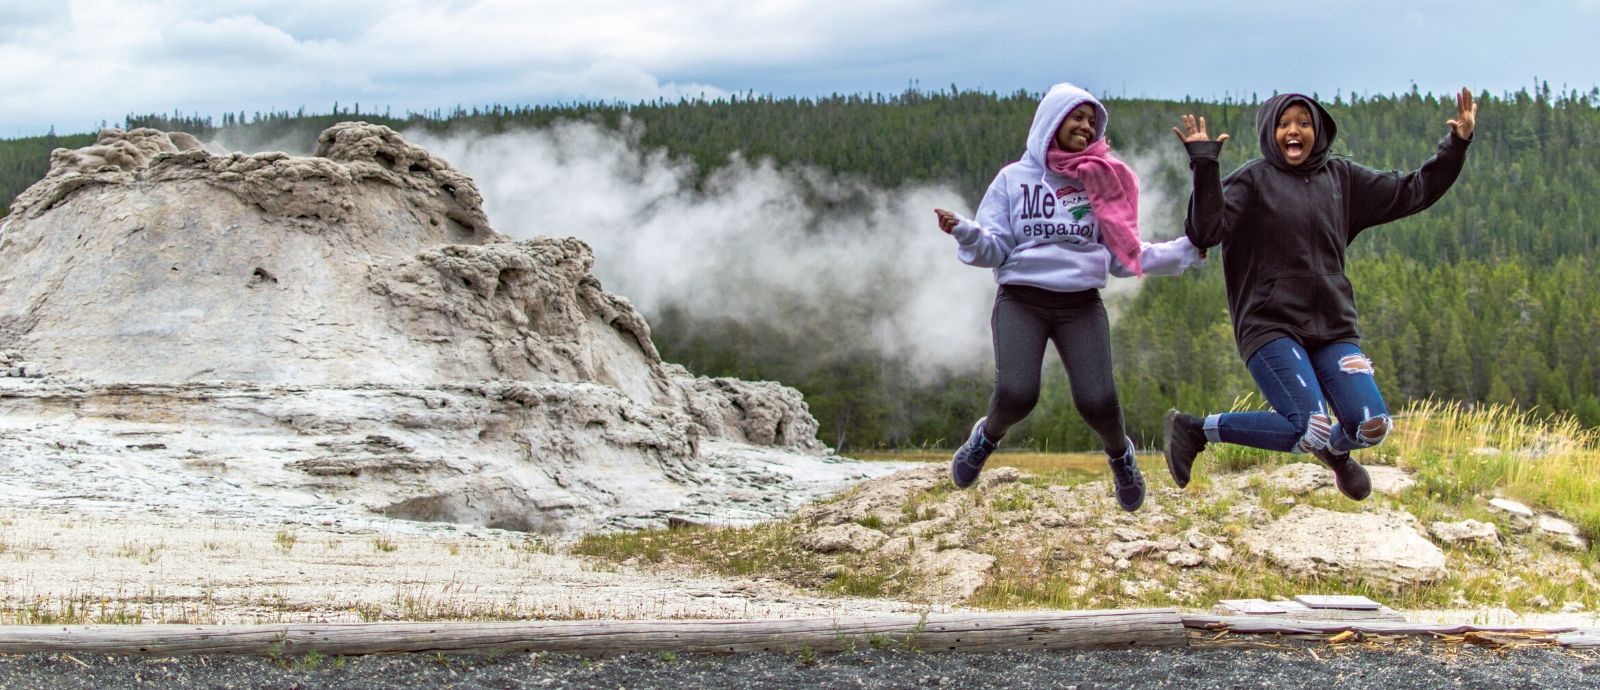 Discover Yellowstone Youth Adventure